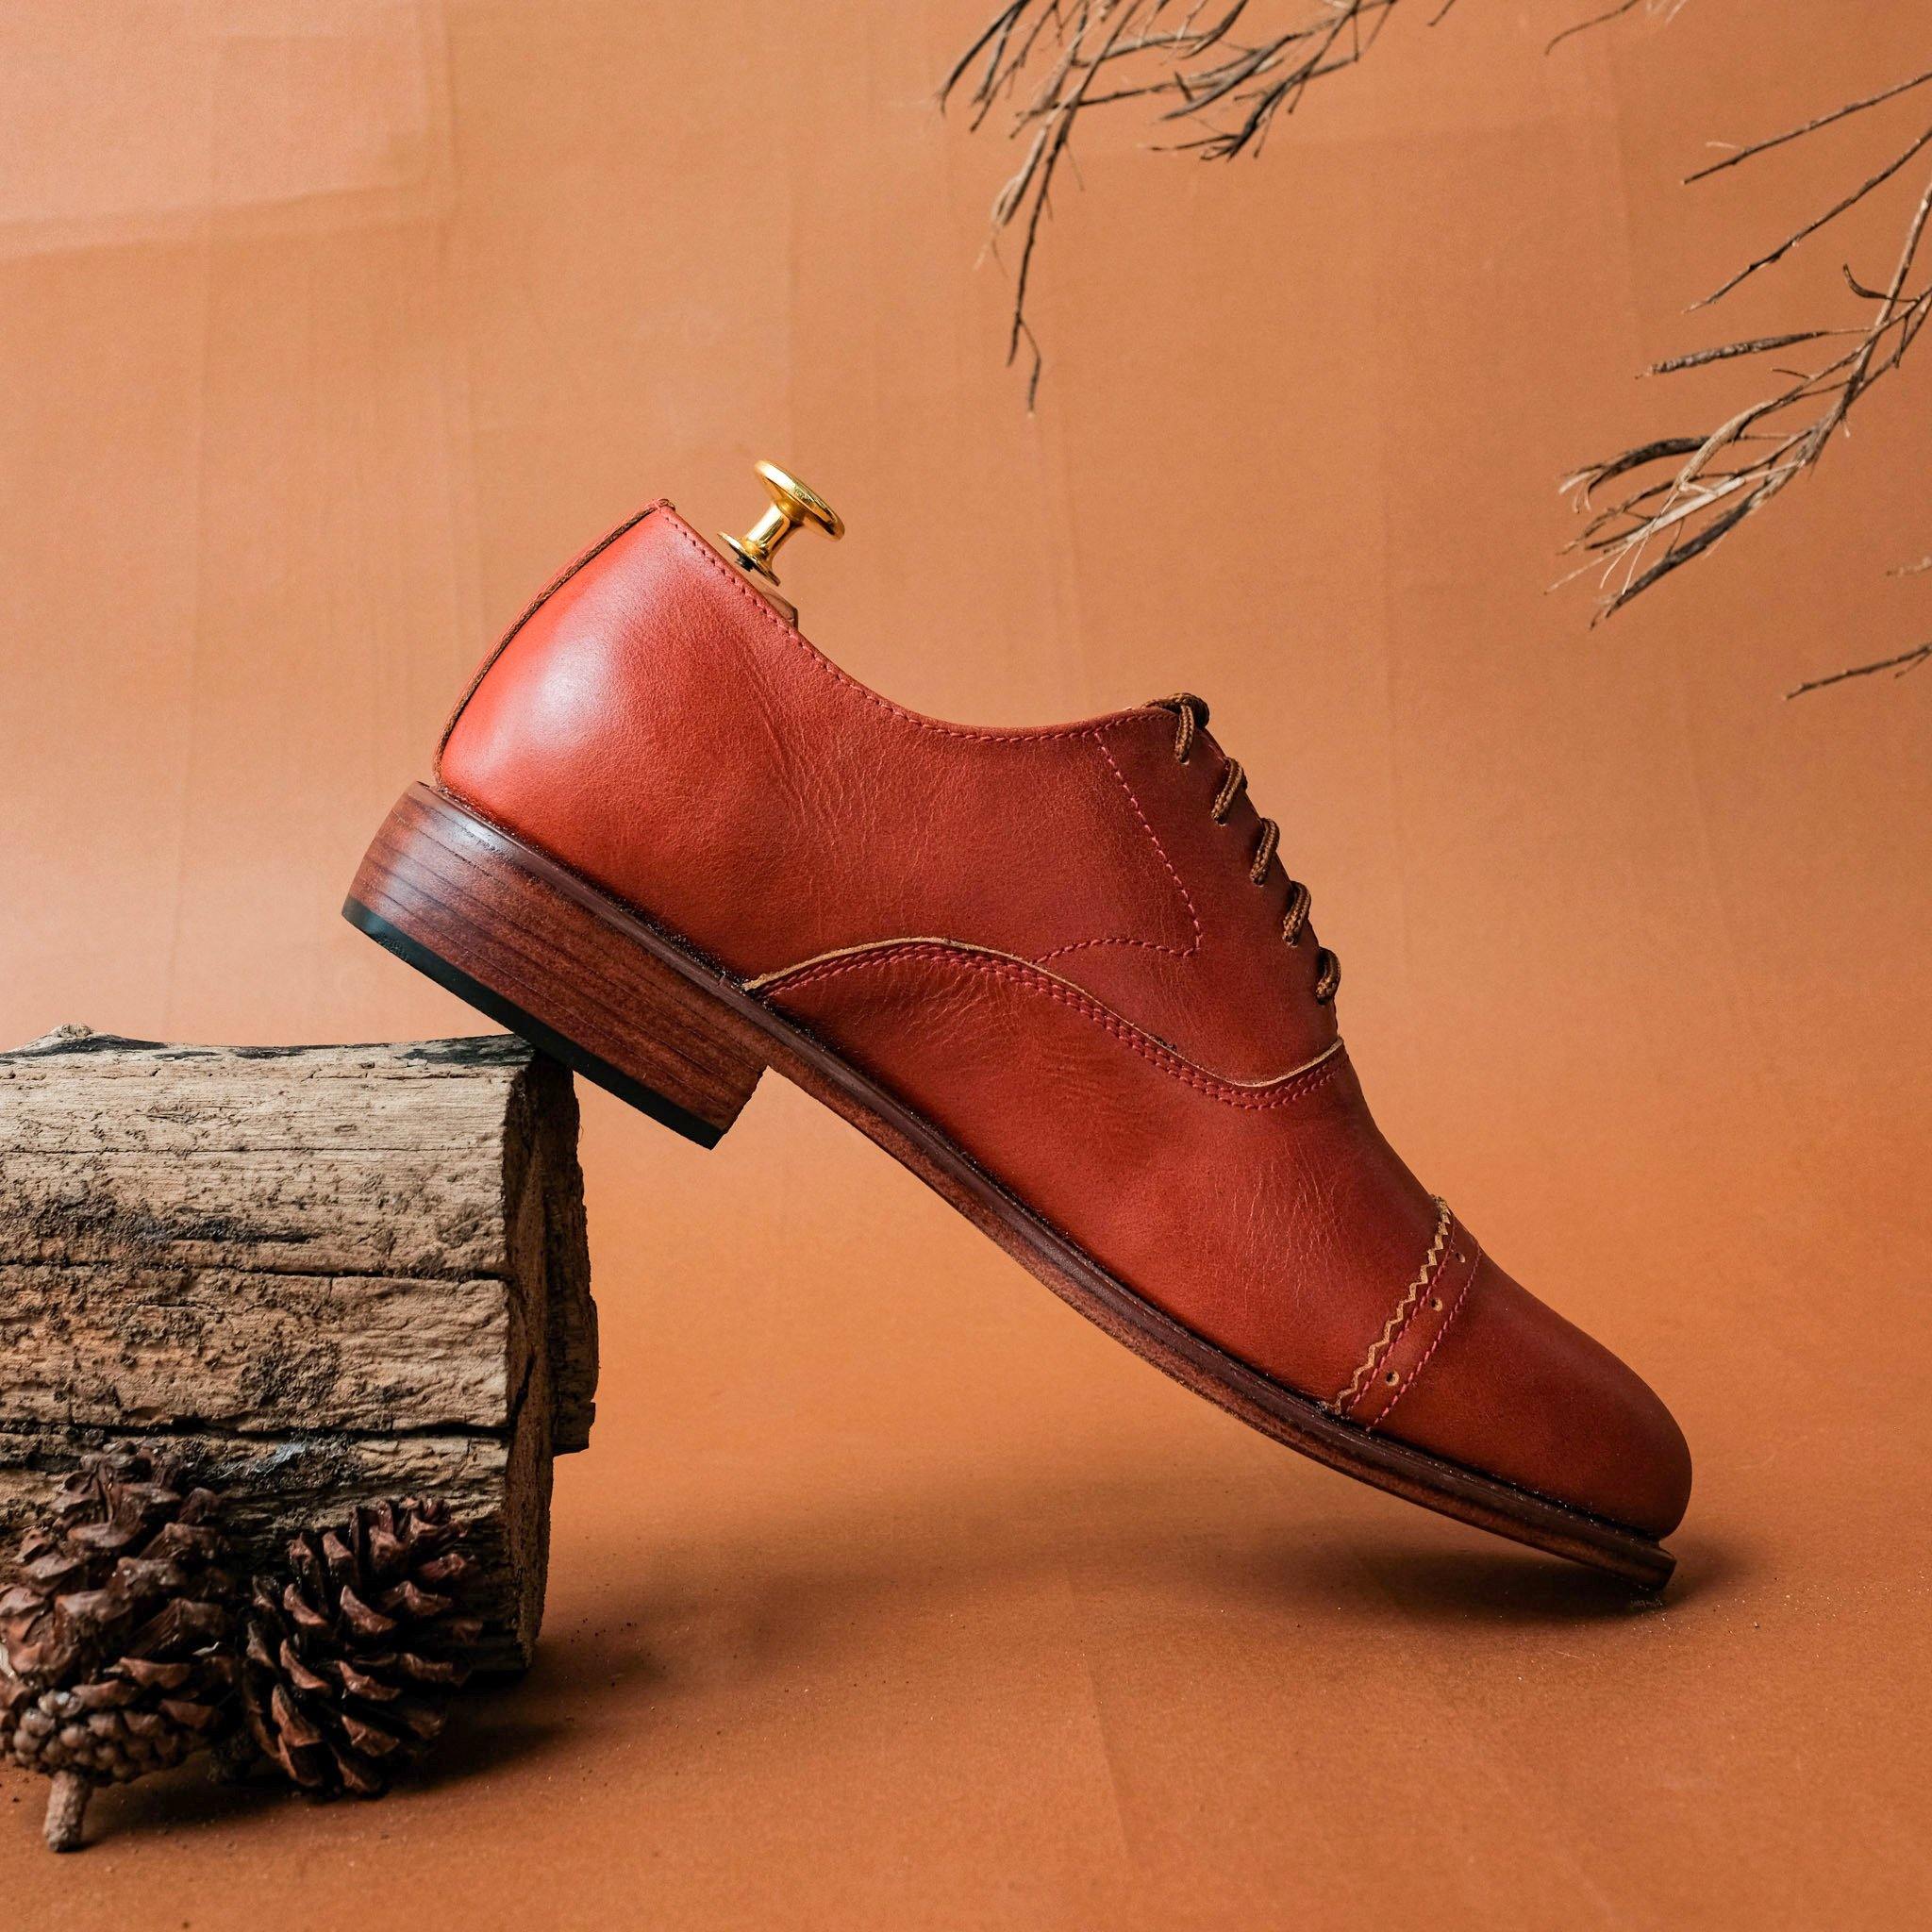 Savoy Shoes - Handcrafted by Swing Love